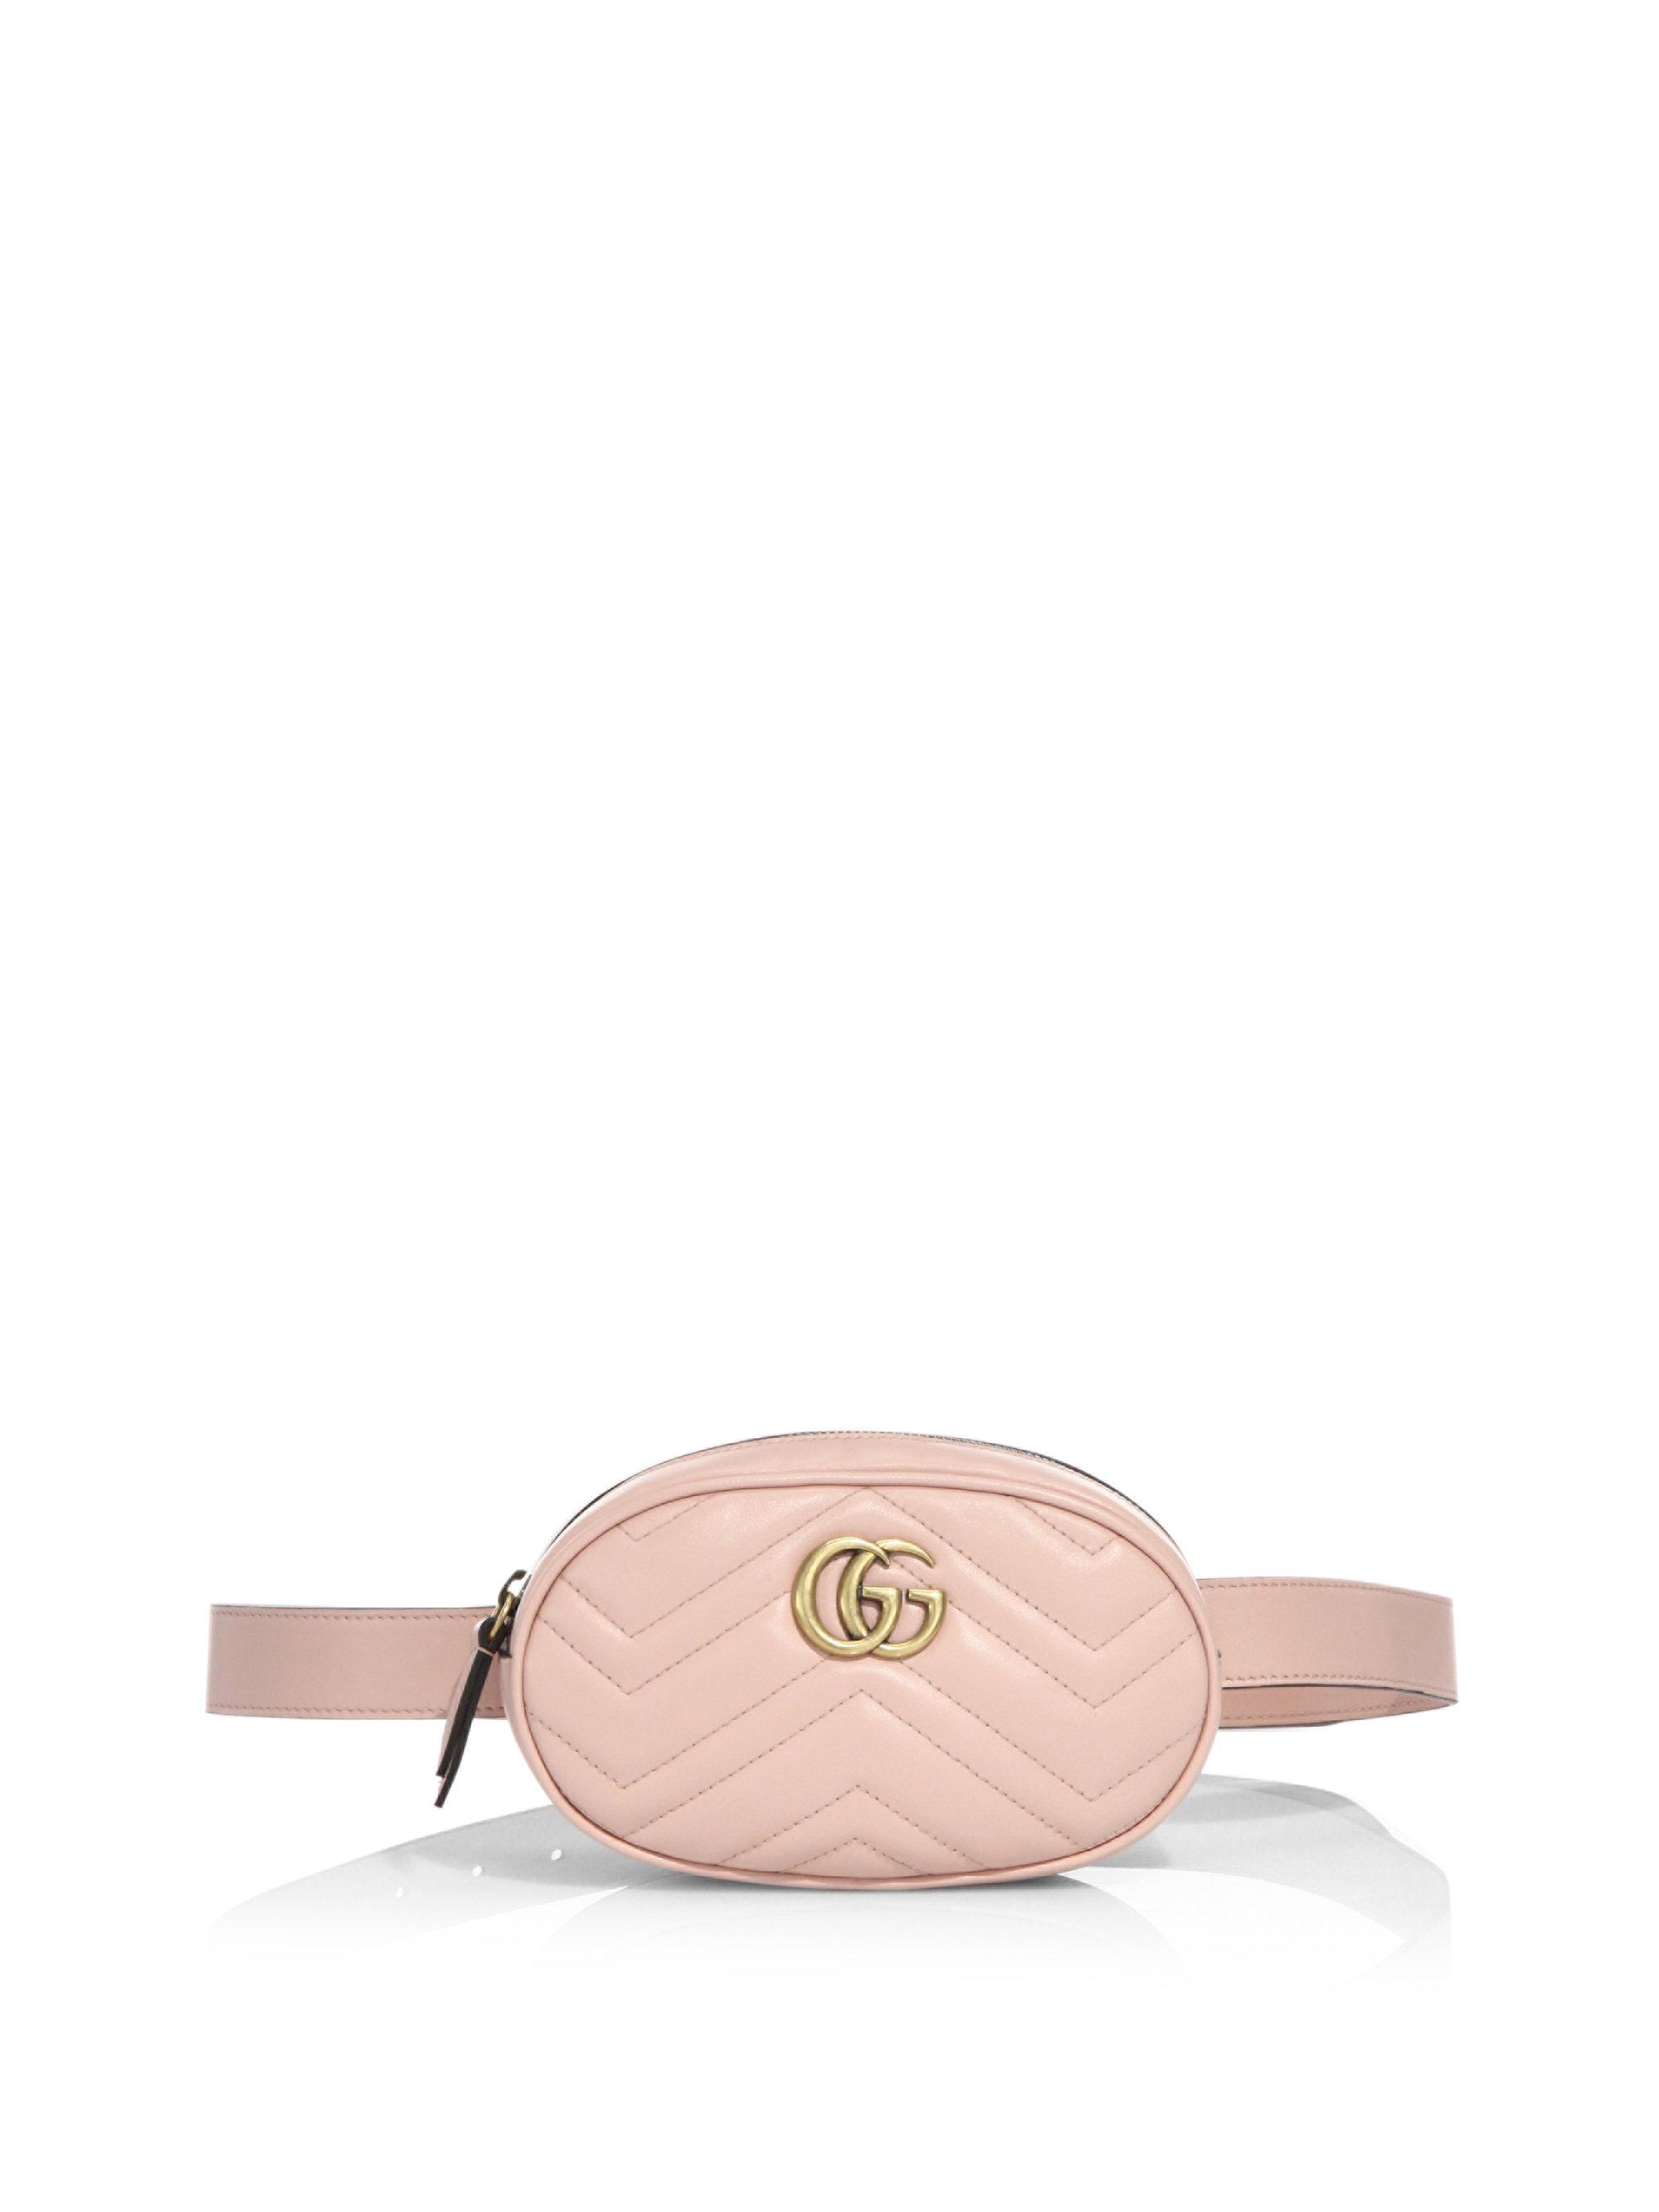 Gucci Gg Marmont Matelasse Leather Belt Bag in Pink - Lyst